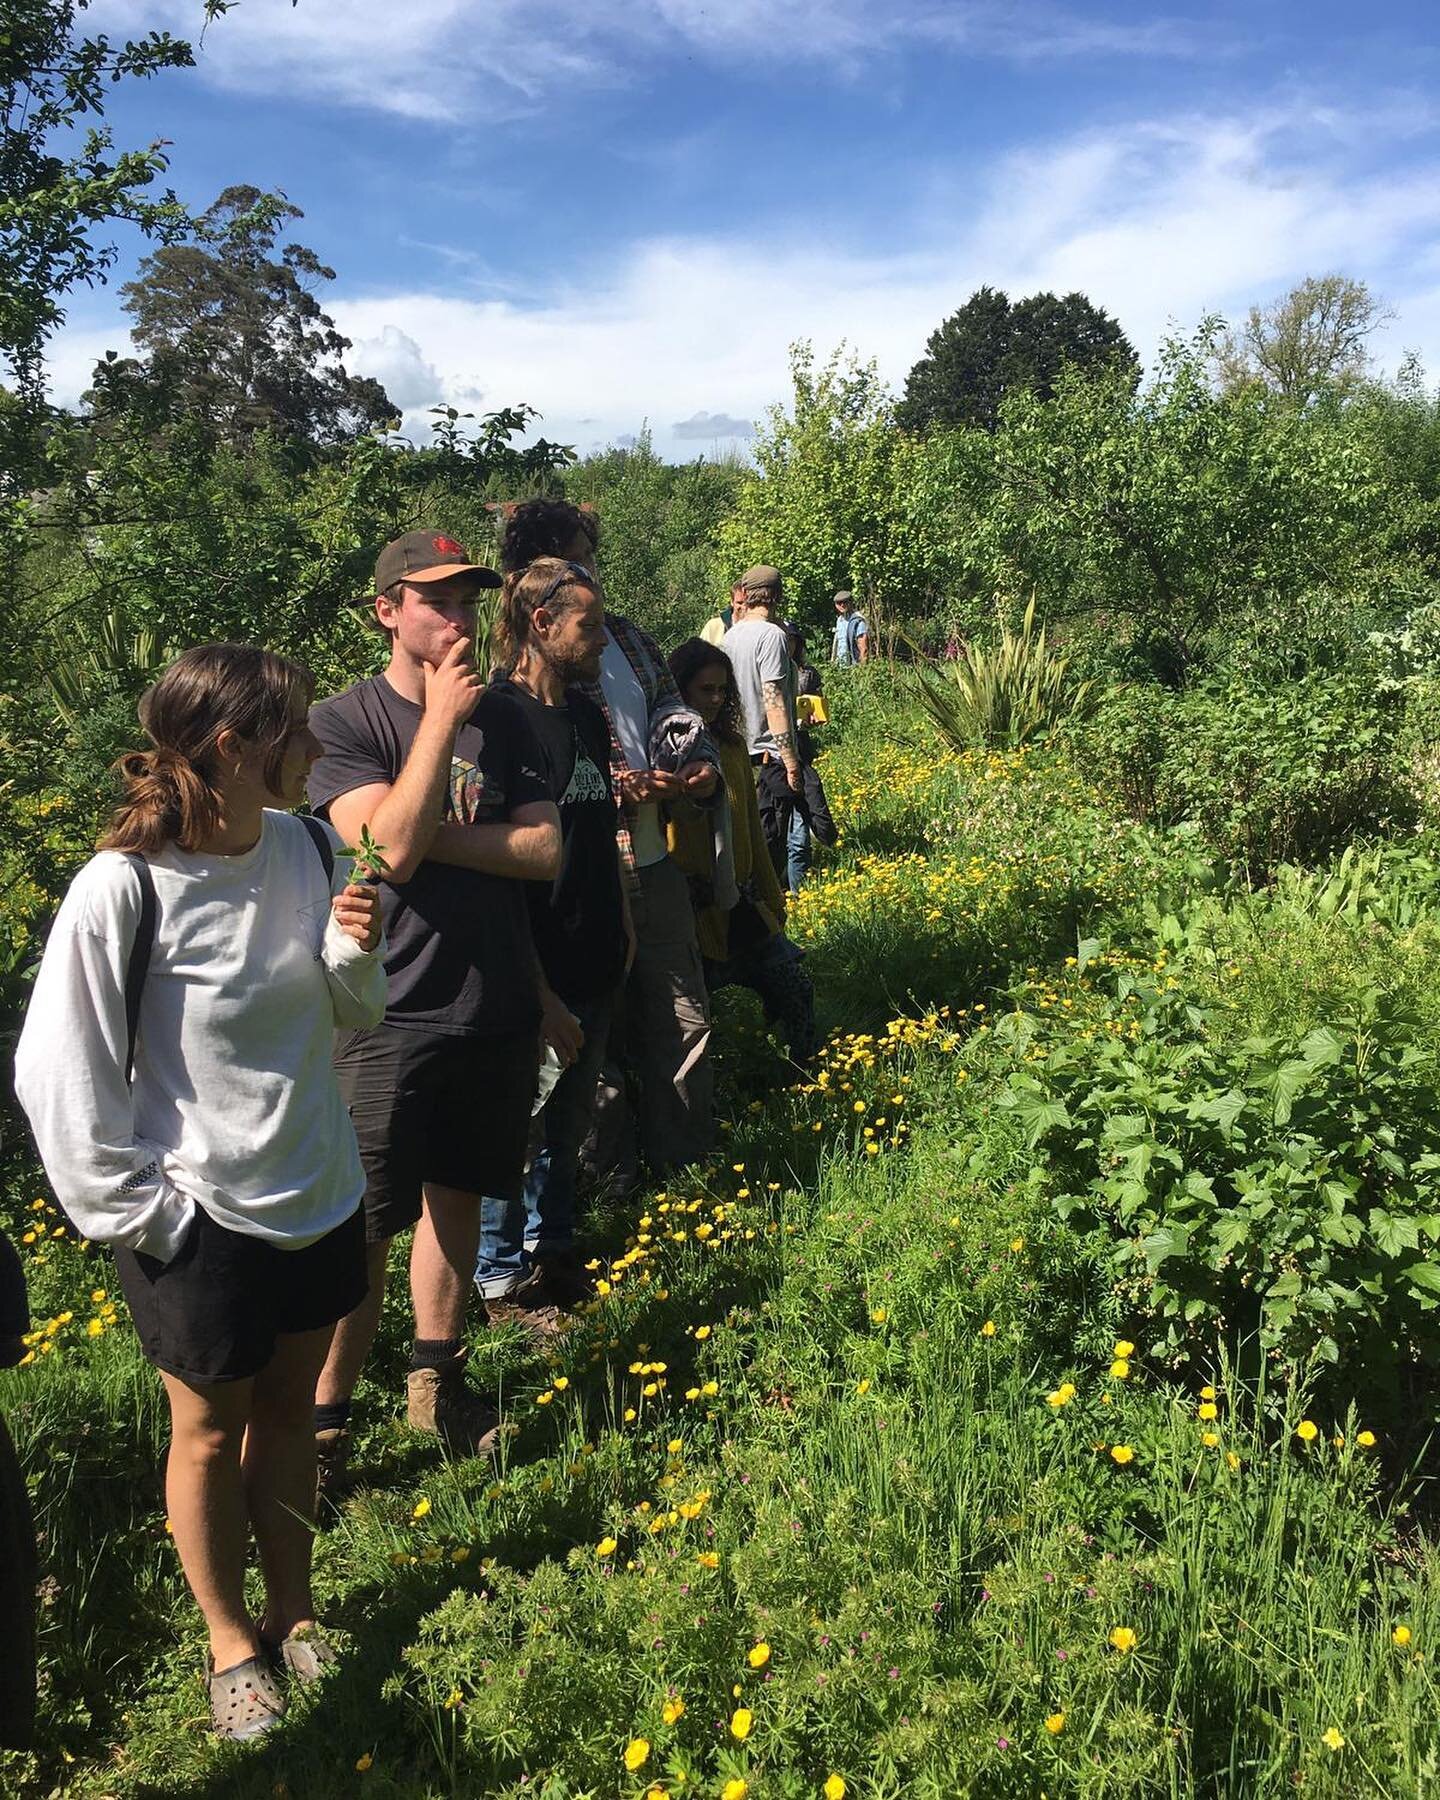 A fabulous visit to @schumachercollege on Thursday with our Level 3 students, @columpawson showed us around the agroforestry systems there. A beautiful example of horticultural agroforestry. #schumachercollege #agroforestrysystems #agroforestry #rege